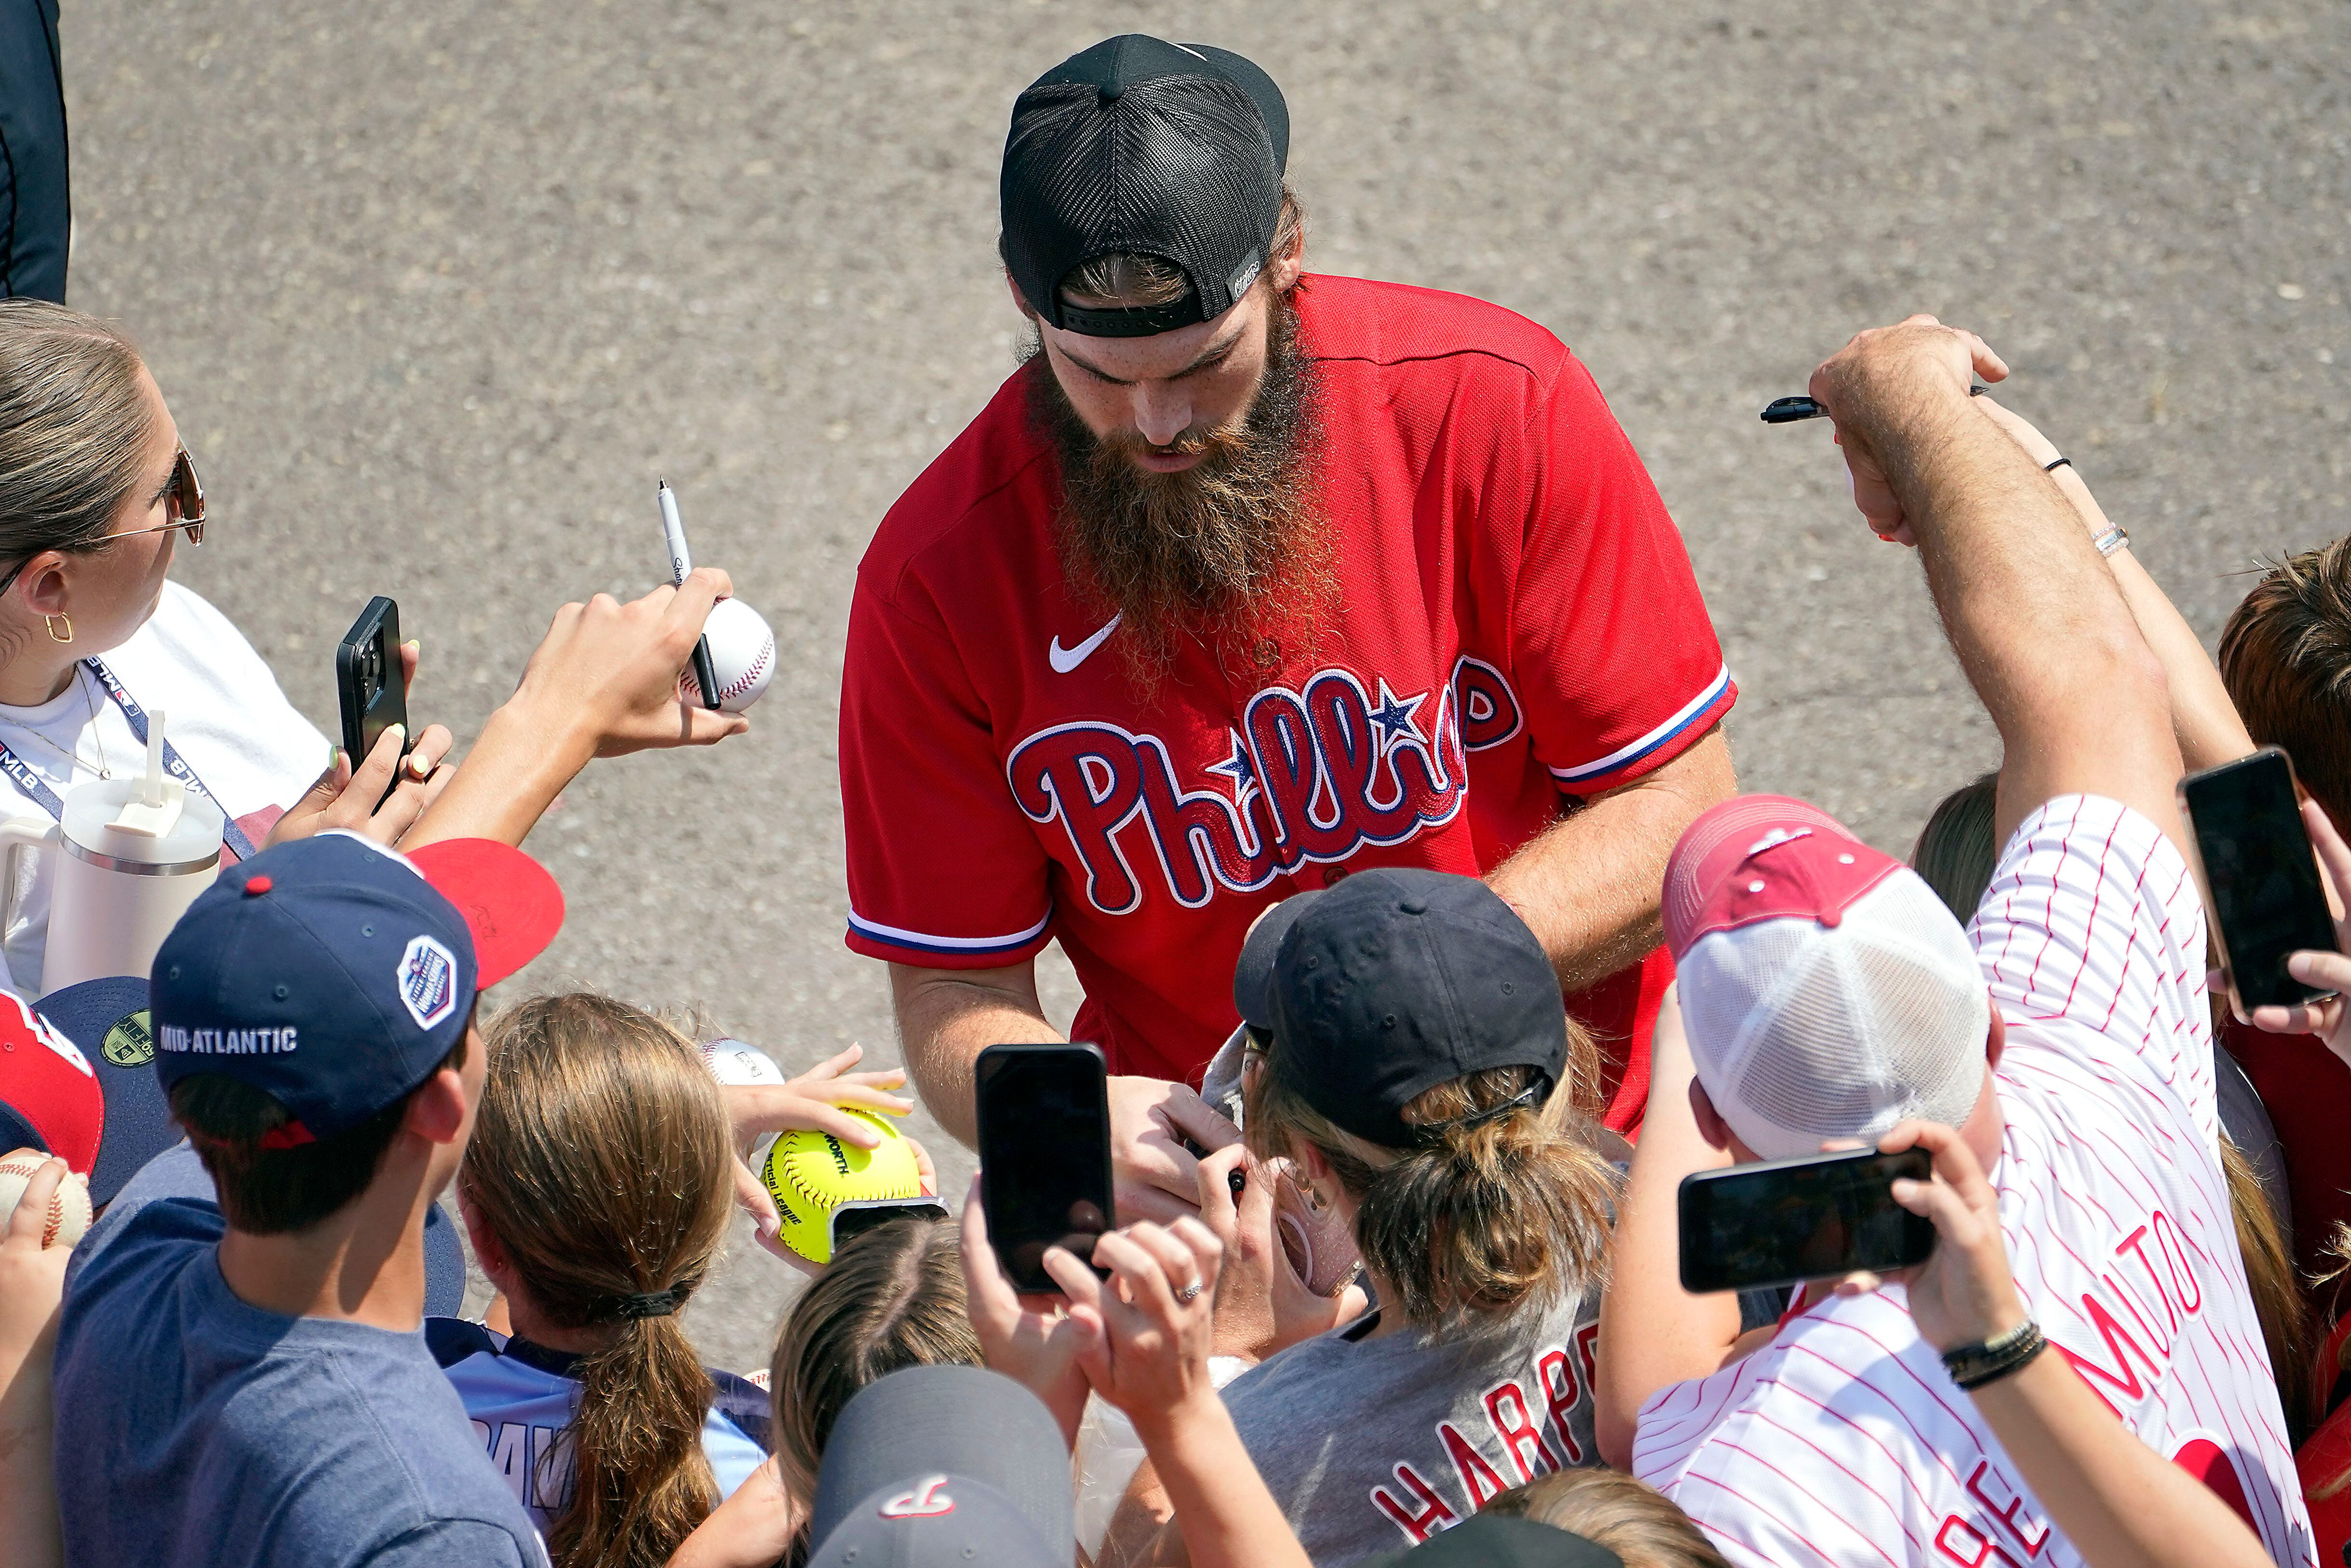 Phillies' Bryce Harper's message to Yankees fan: 'Come be a Phillies fan' 